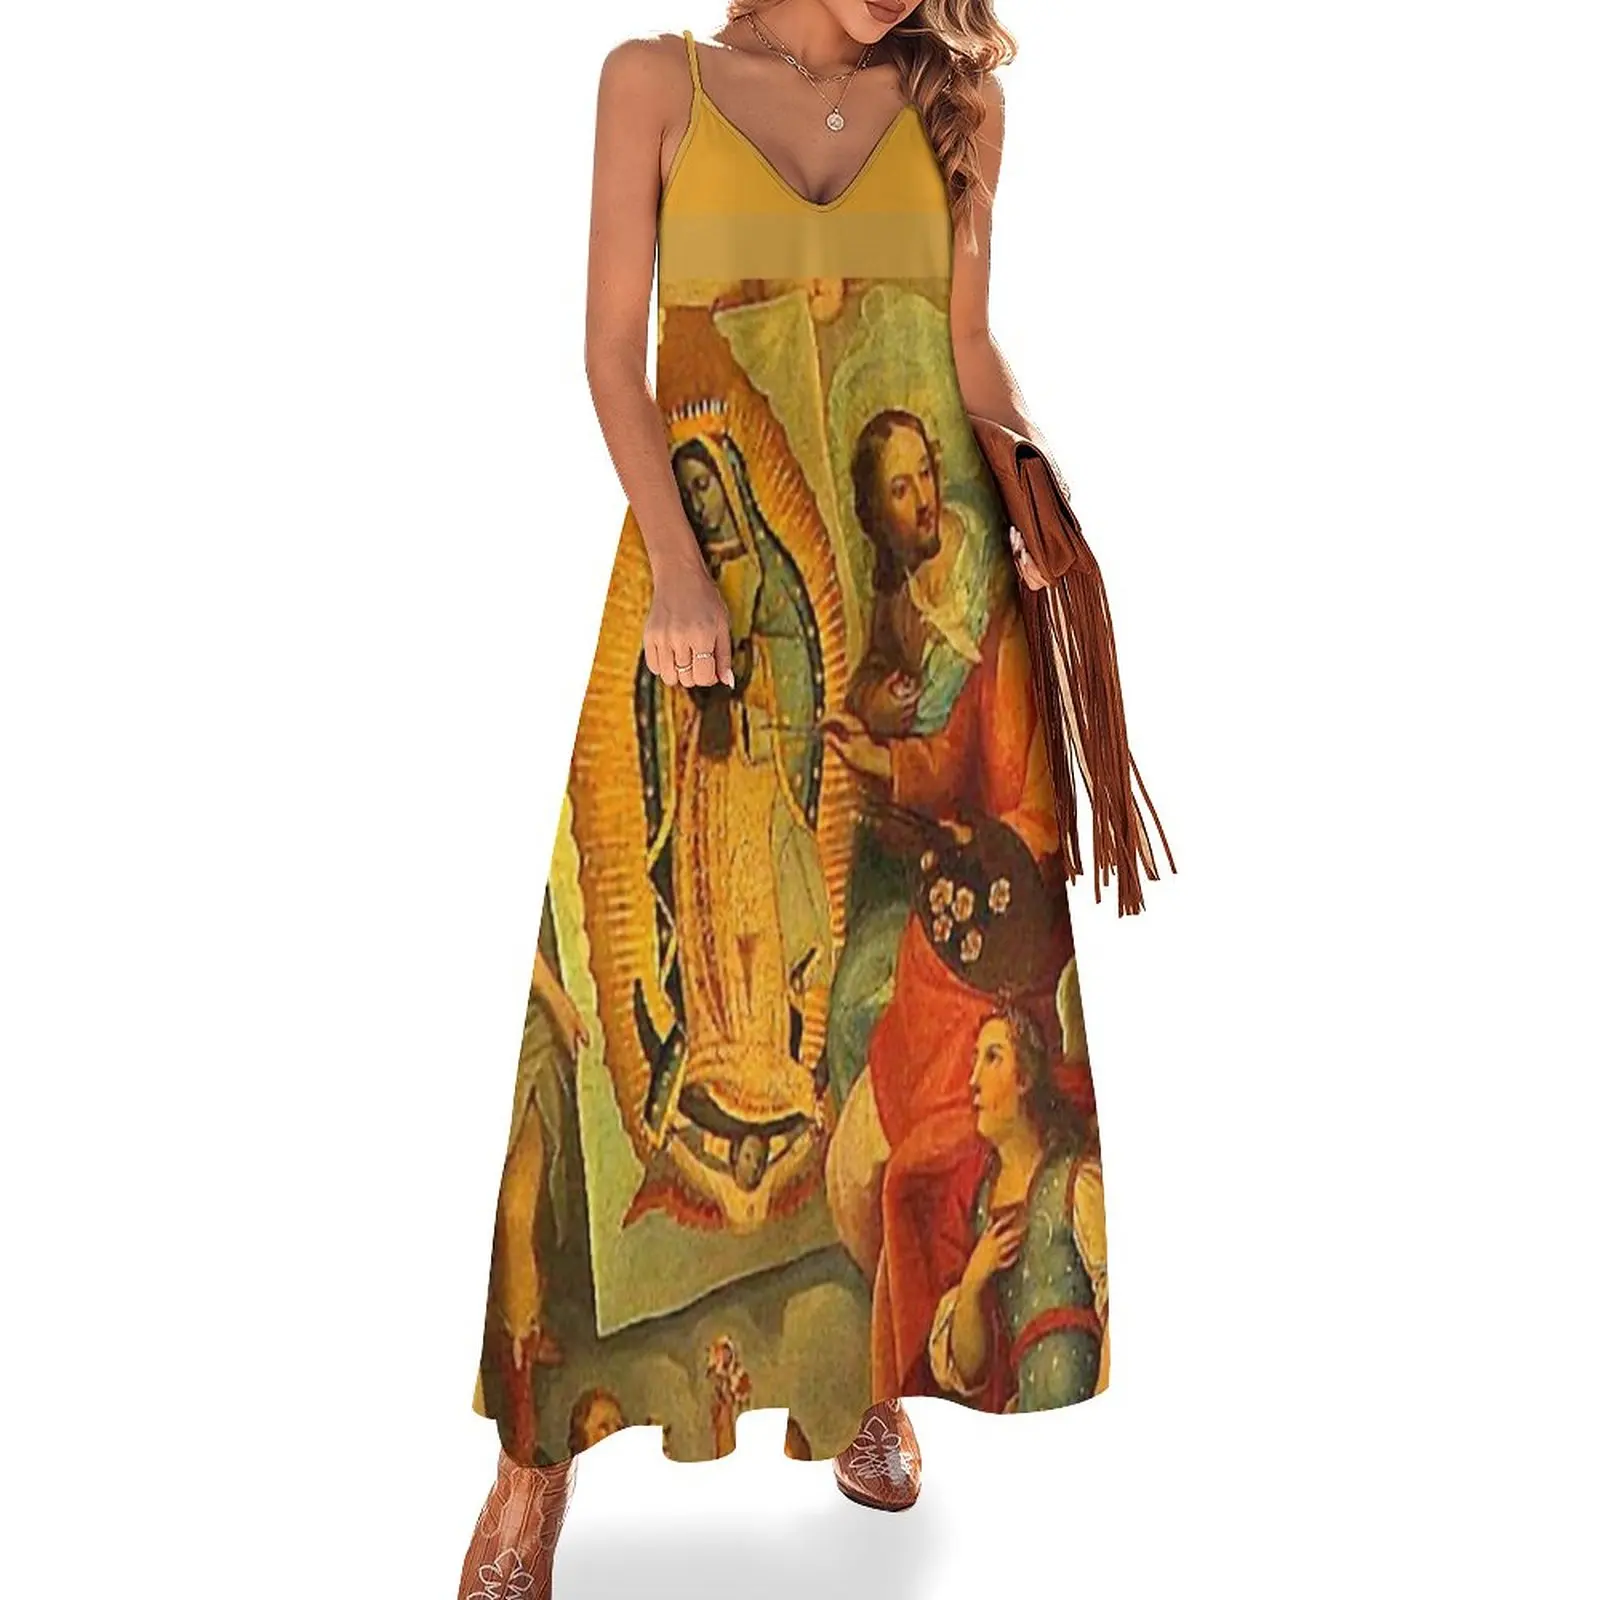 

Our Lady of Guadalupe Virgin Mary Mexico Jesus & God the Father Sleeveless Dress Dance dresses beach outfits for women